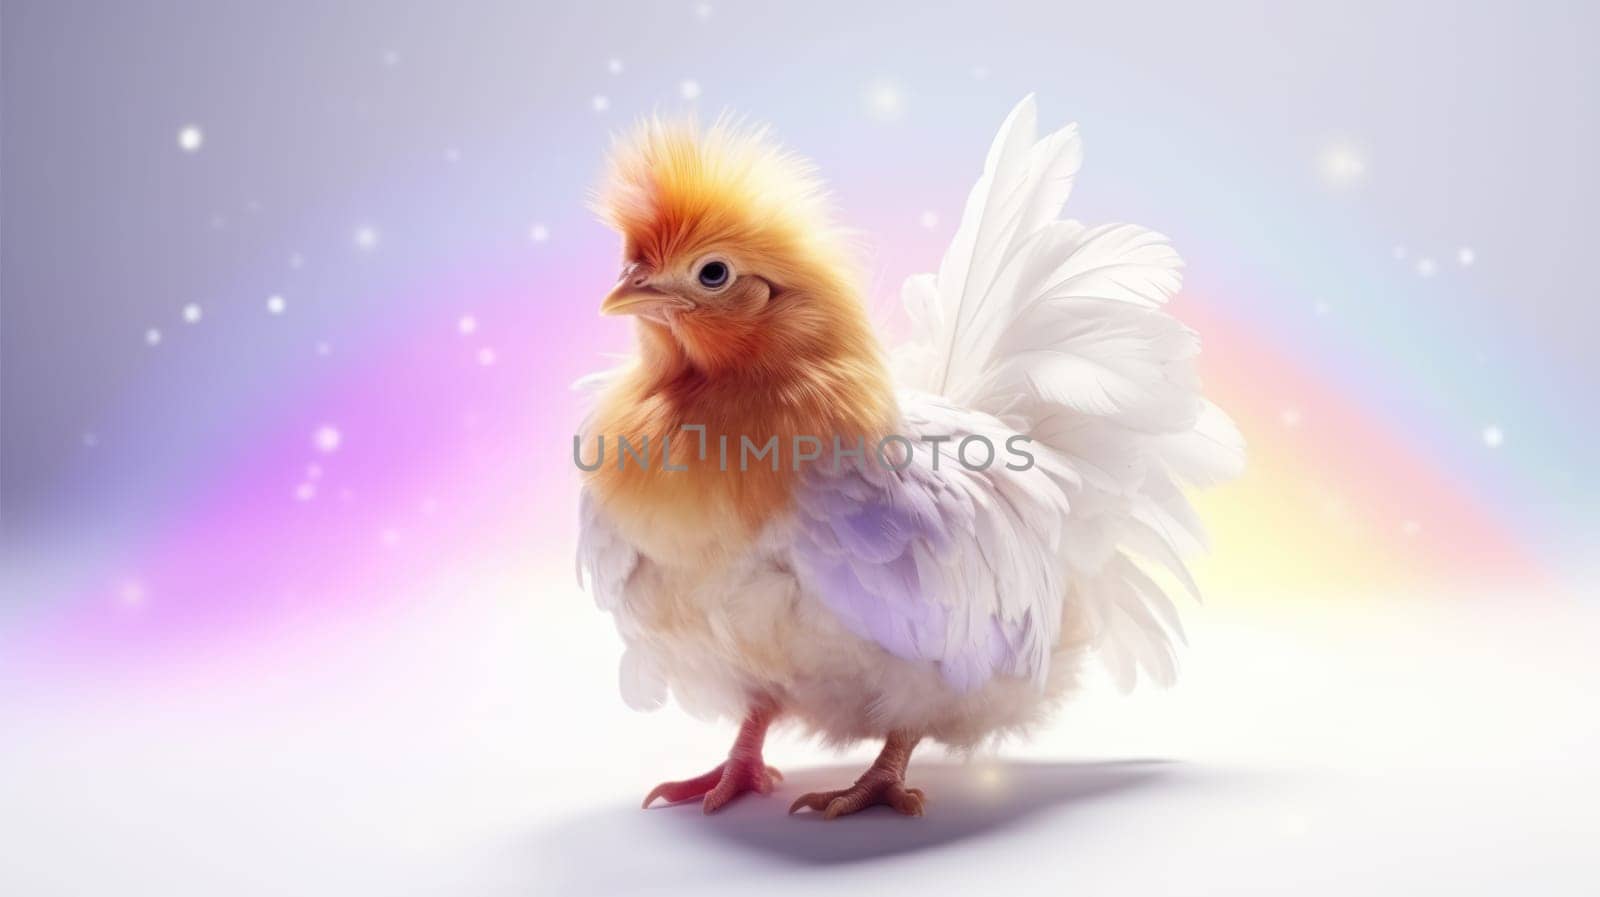 A vibrant chicken with rainbow feathers stands on a pastel rainbow backdrop. Its multicolored feathers contrast beautifully with the soft gradient background, creating a whimsical and cheerful scene.